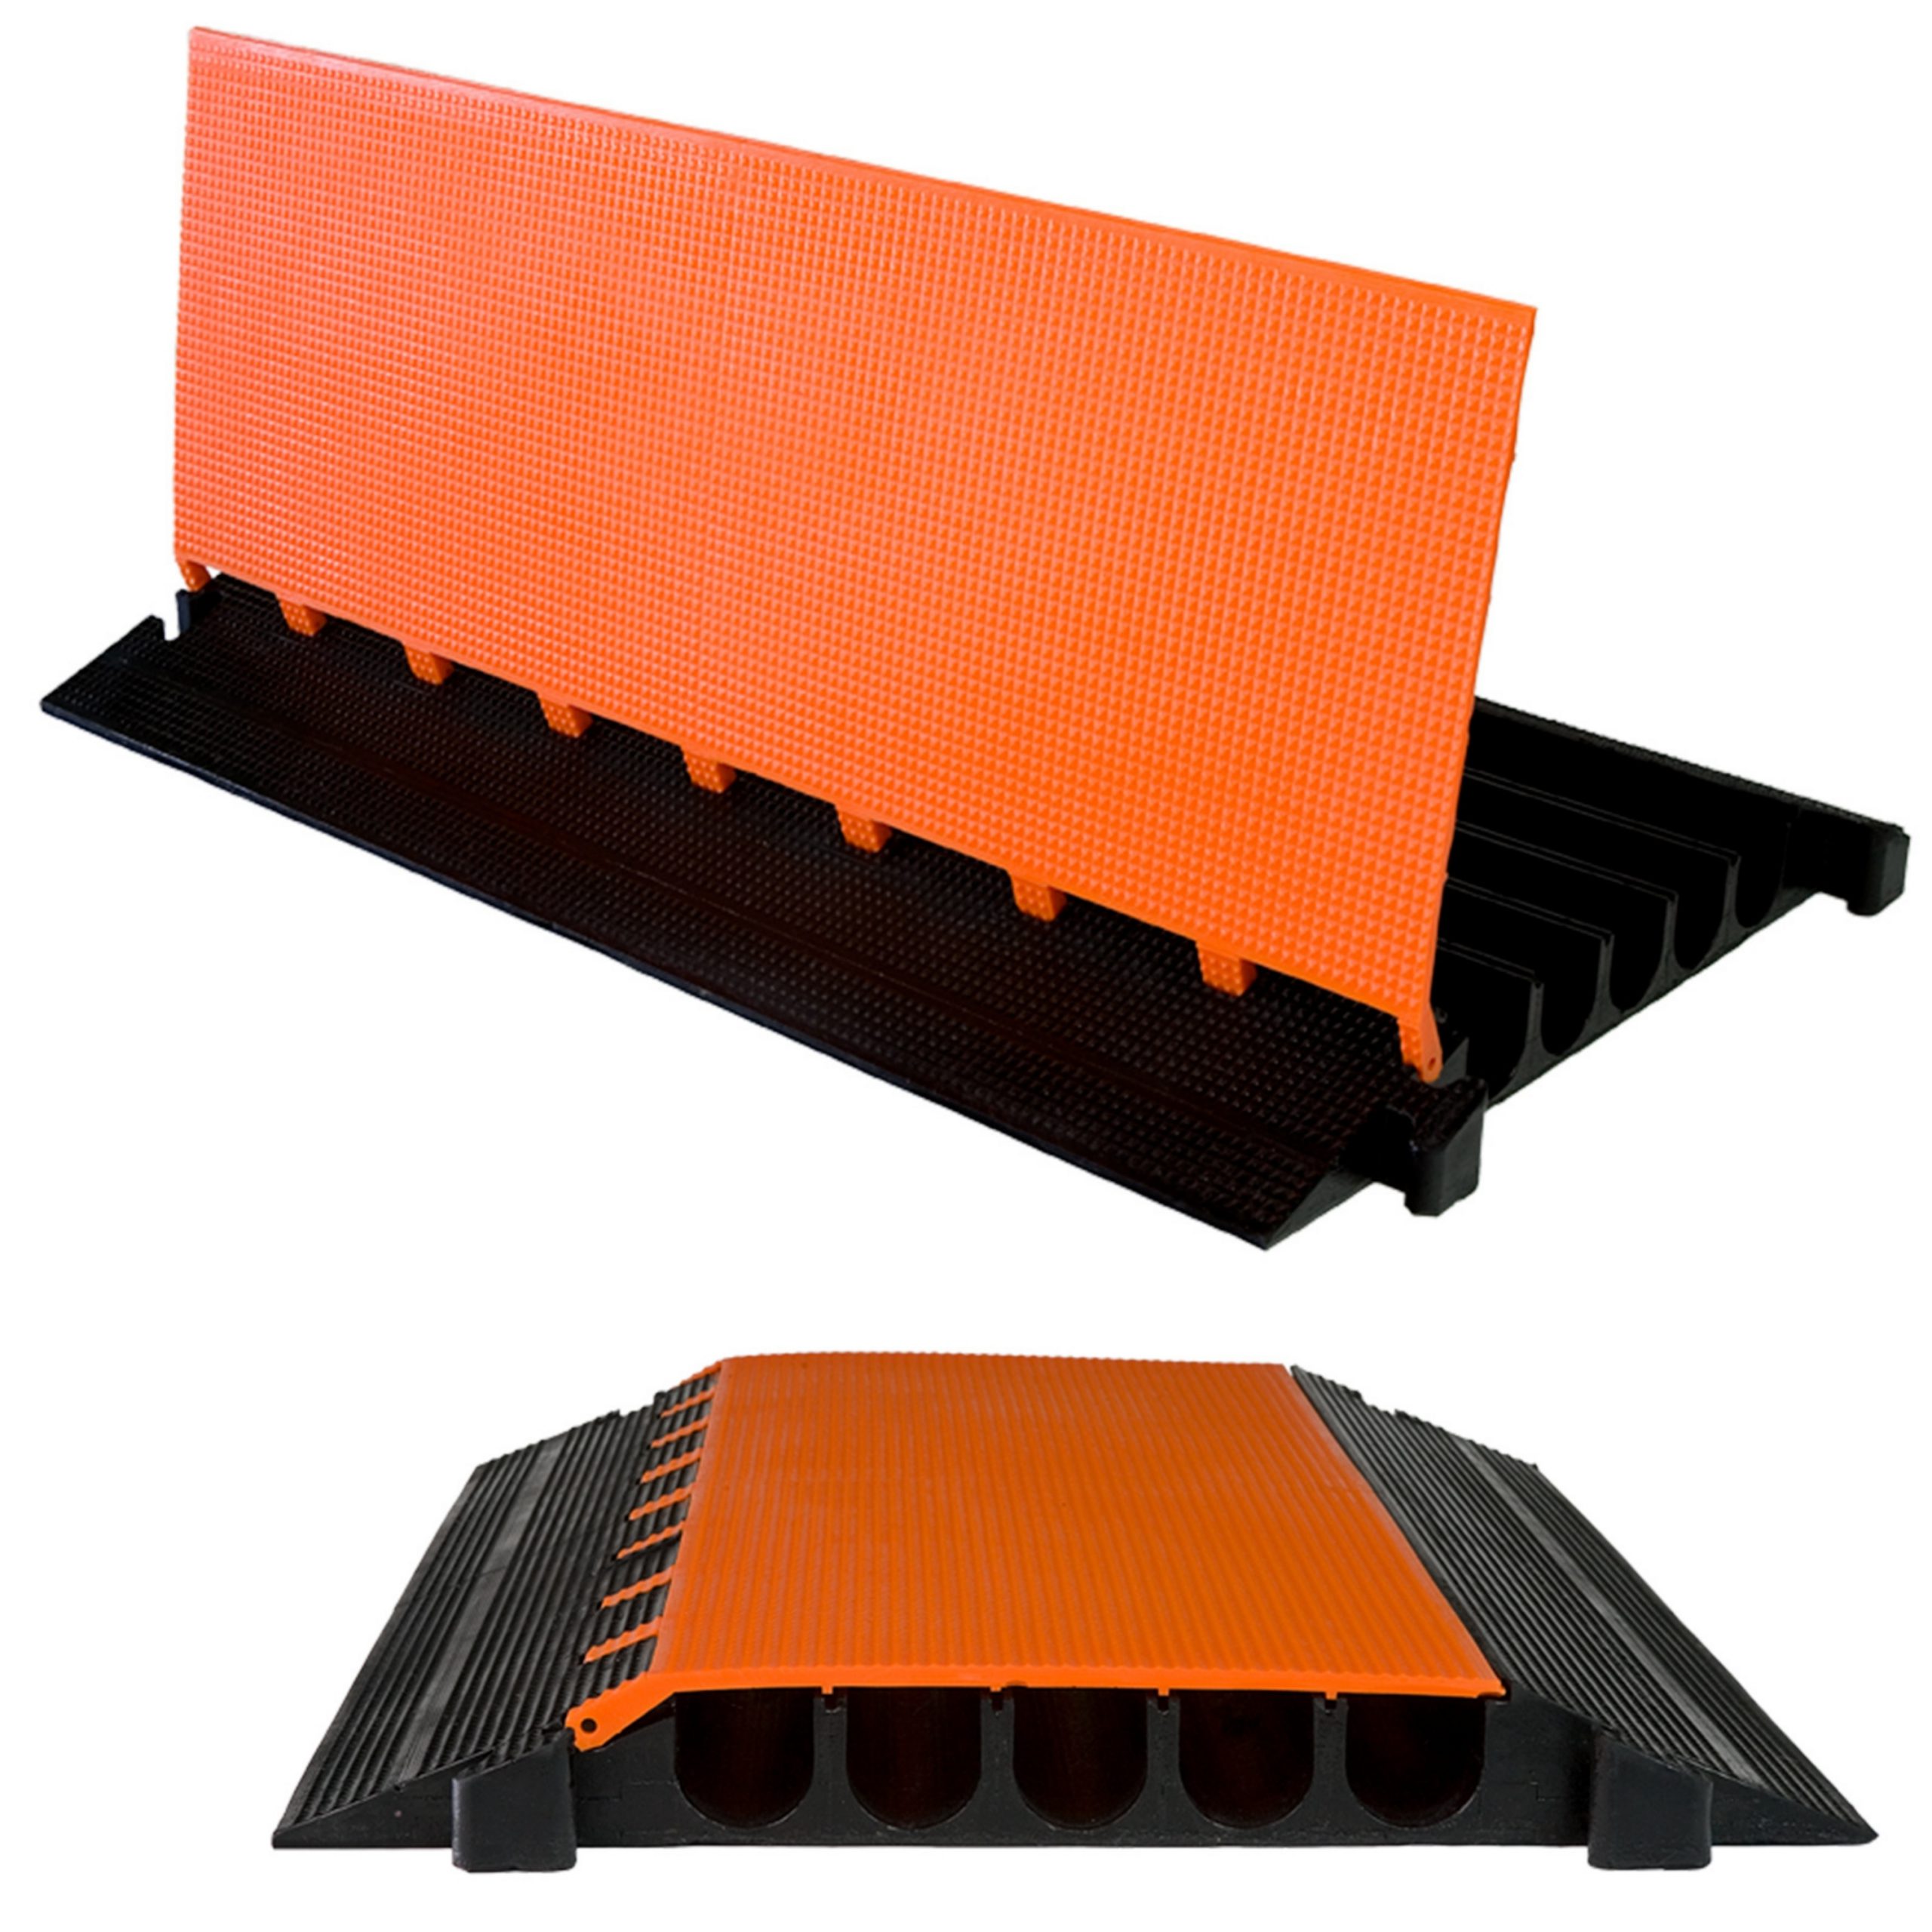 16500 lb Drive Over Wire Protector Orange/Black Three 3 Channels 37 x 16.5 x 2.5 Heavy Duty Elasco MG3300 Mighty Guard Interlocking Cable Ramp Floor Cord Cover per Tire Load Capacity 